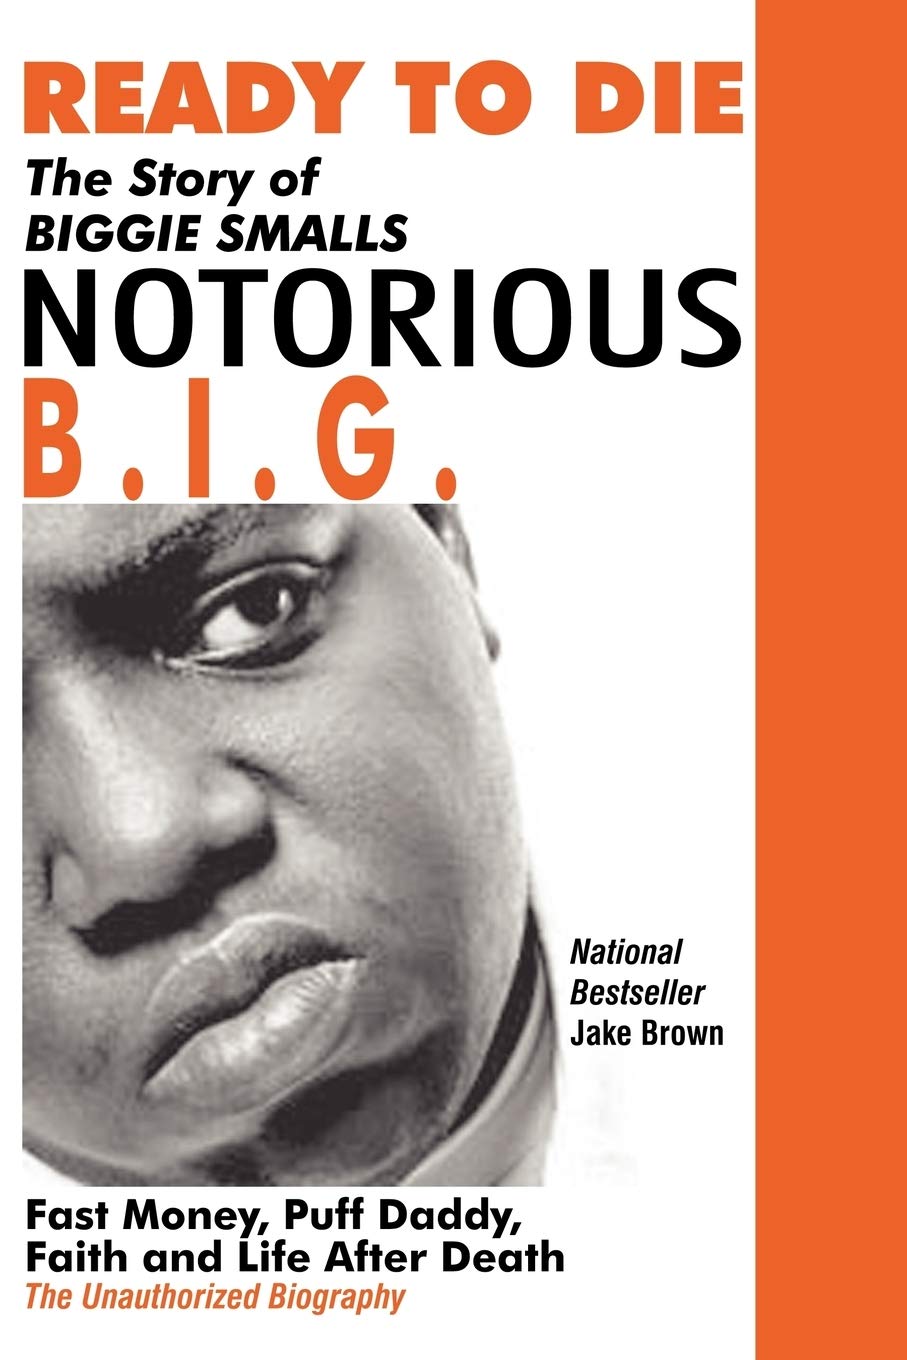 Ready to Die: The Story of Biggie Smalls Notorious B.I.G. SureShot Books